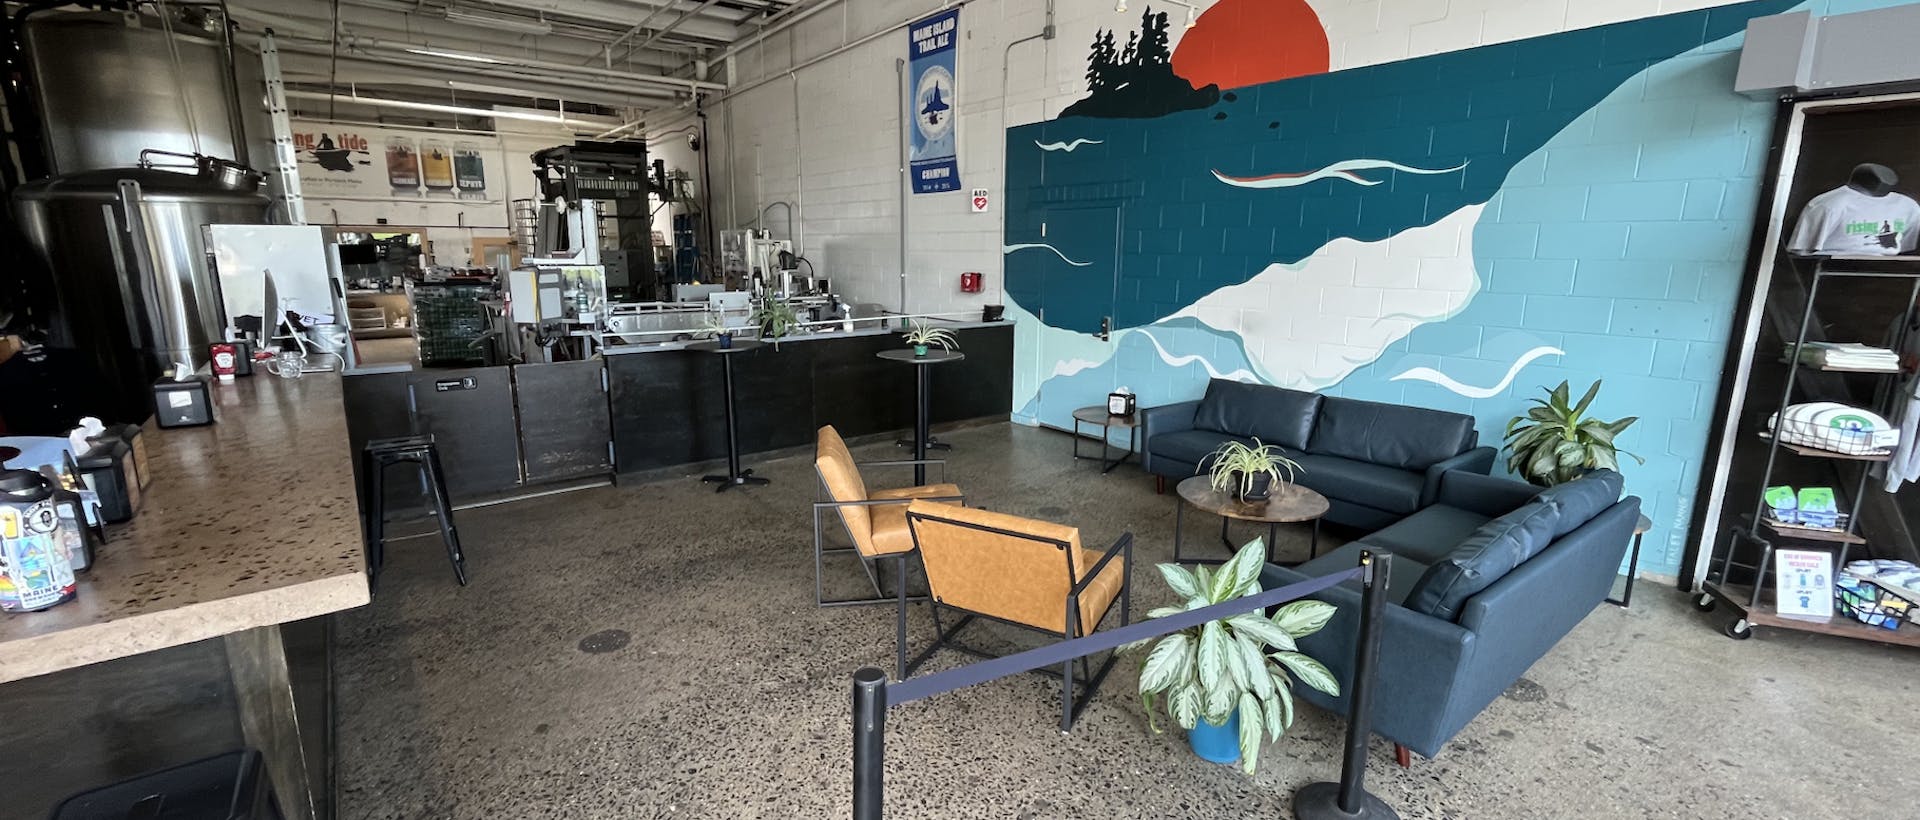 Image of the lounge area inside the Rising Tide Tasting Room.